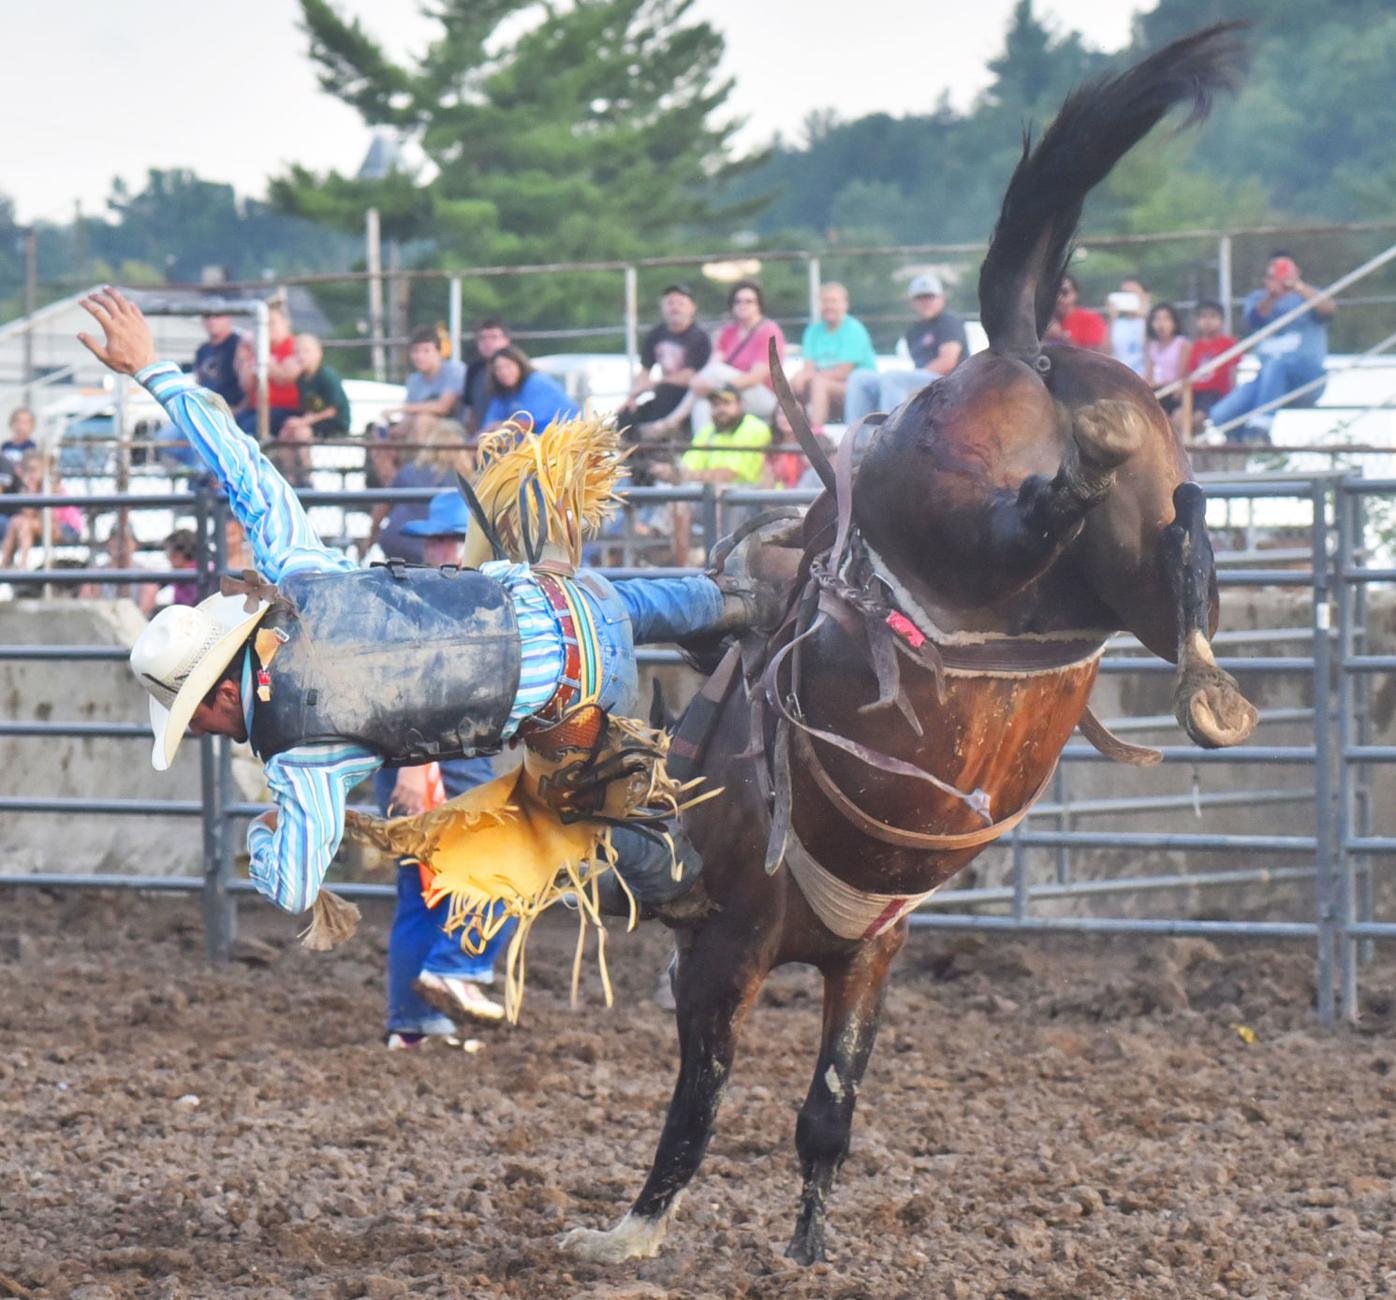 GALLERY Rodeo at the Athens County Fair Uploaded Photos